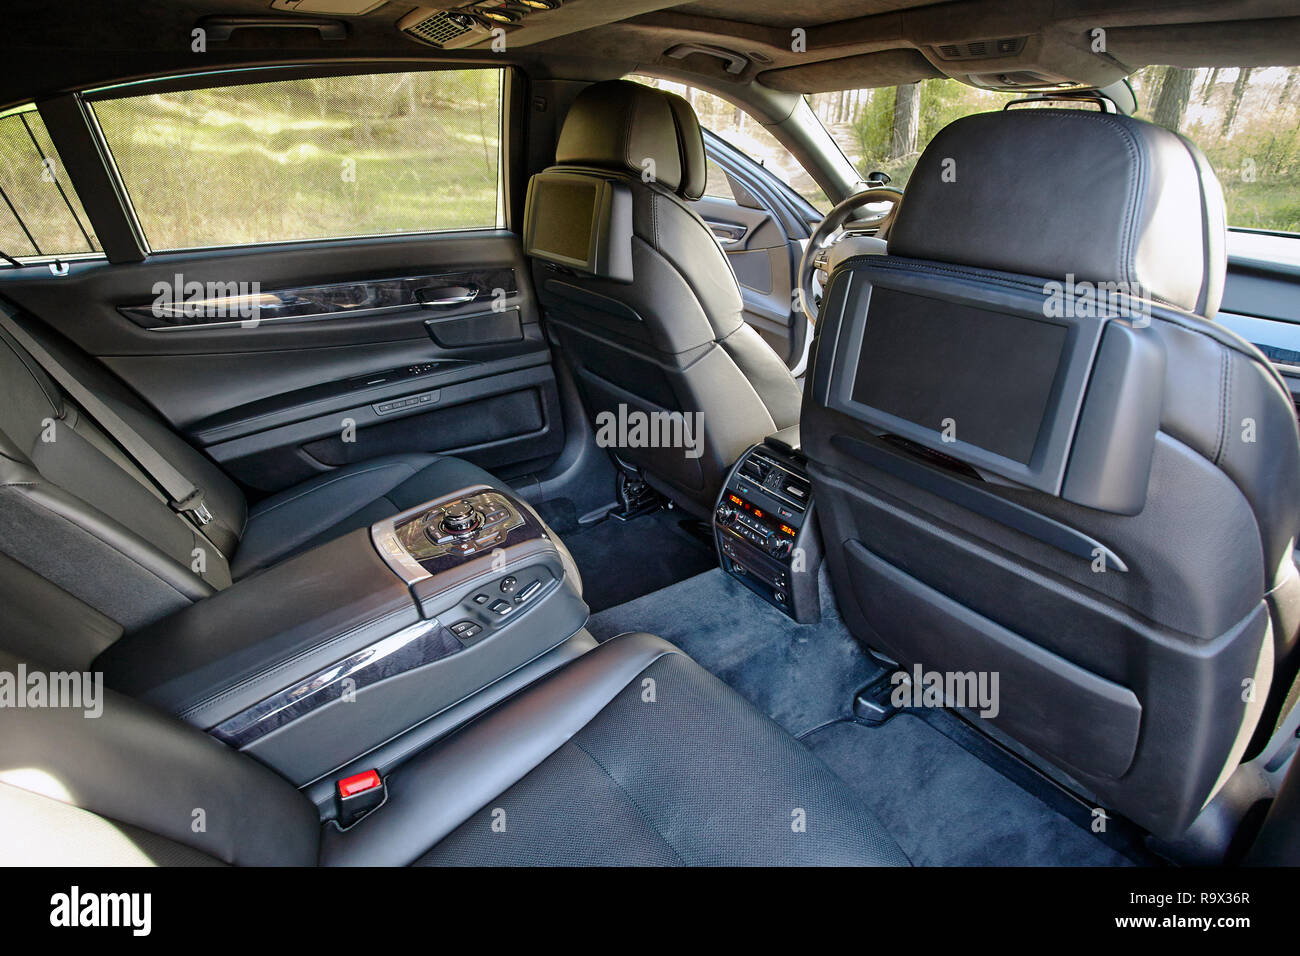 Car inside. Interior of prestige luxury modern car. Two displays for back seats passenger with media control panel copy space and mock up. Stock Photo